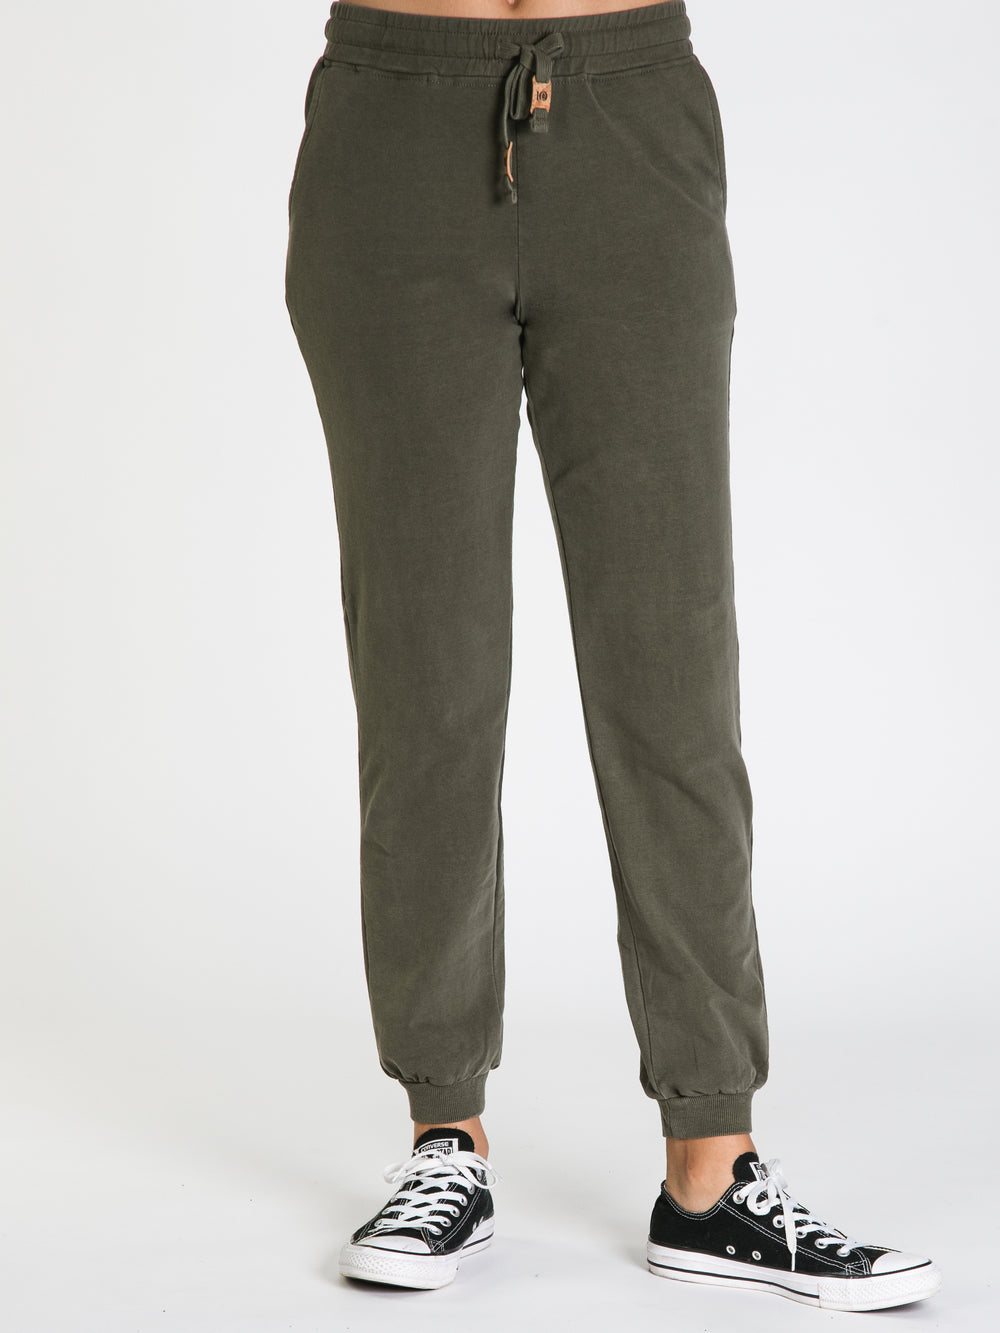 TENTREE FRENCH TERRY FULTON JOGGER - DÉSTOCKAGE